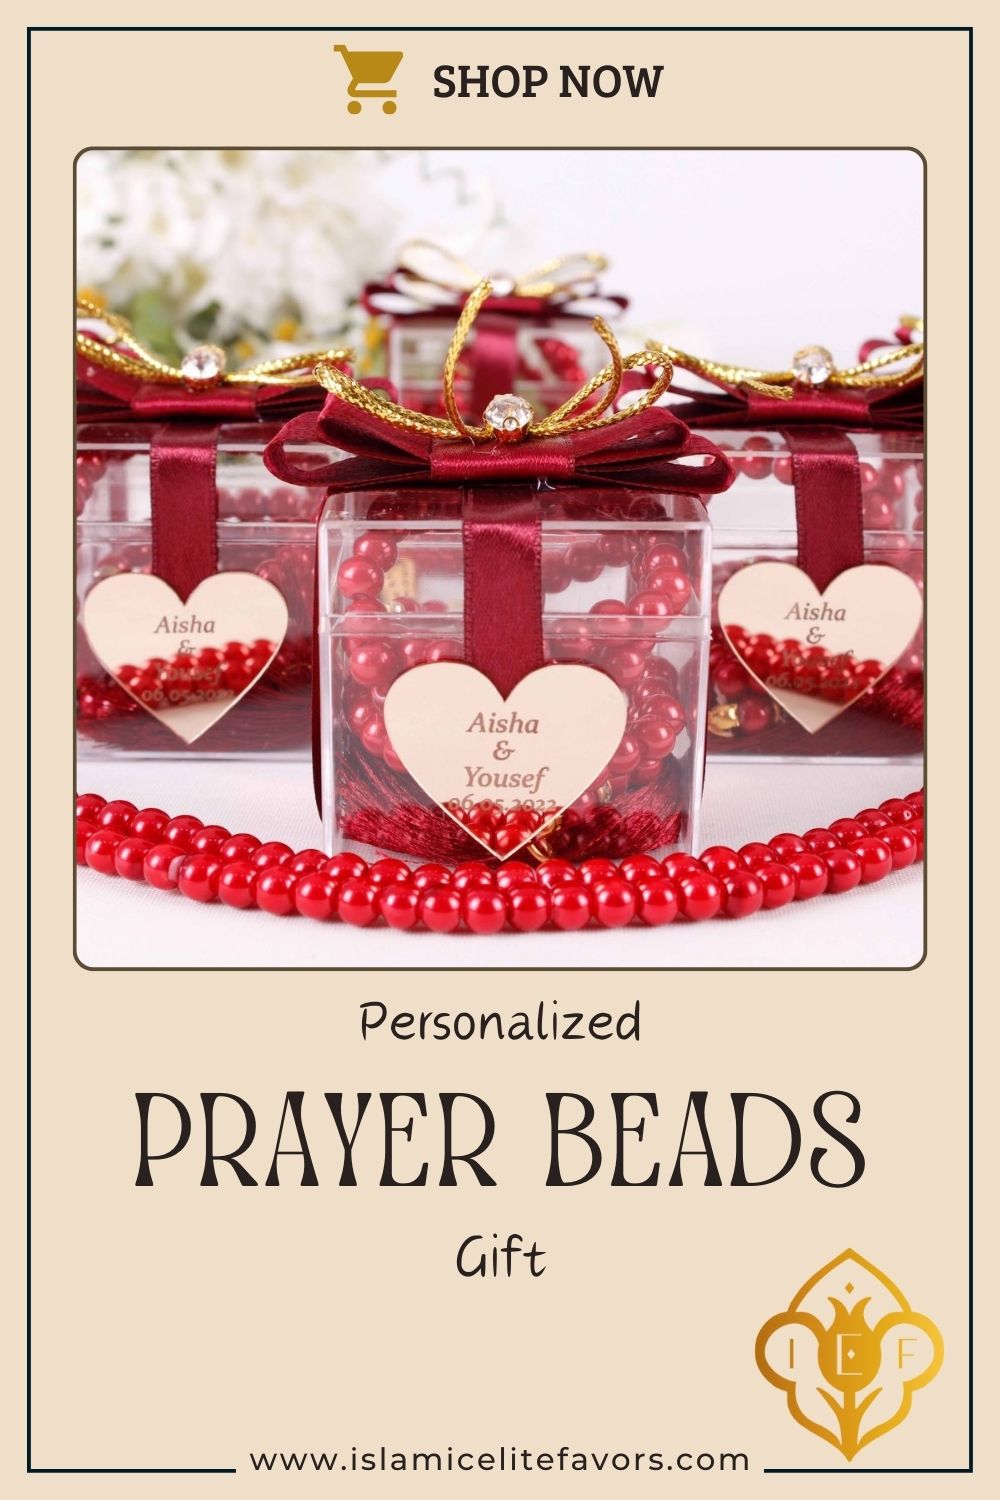 Personalized Prayer Beads Wedding Favor Decorated Gift Box with Heart